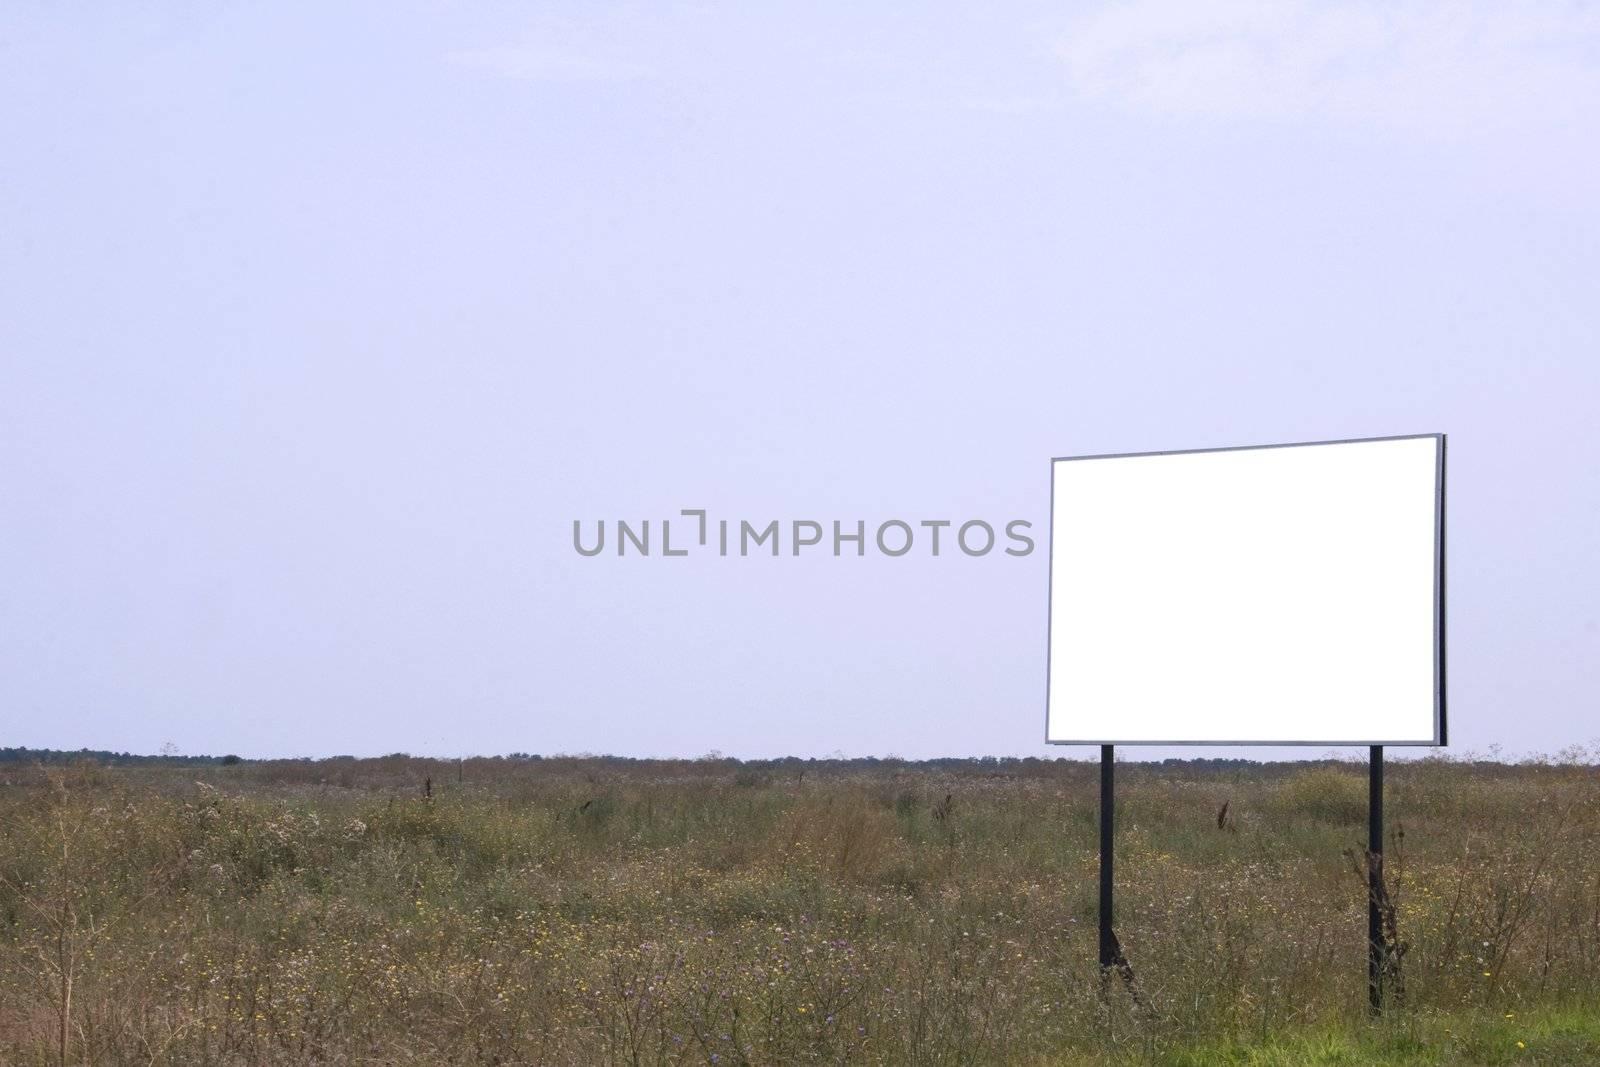 Empty field with white billboard on side of frame